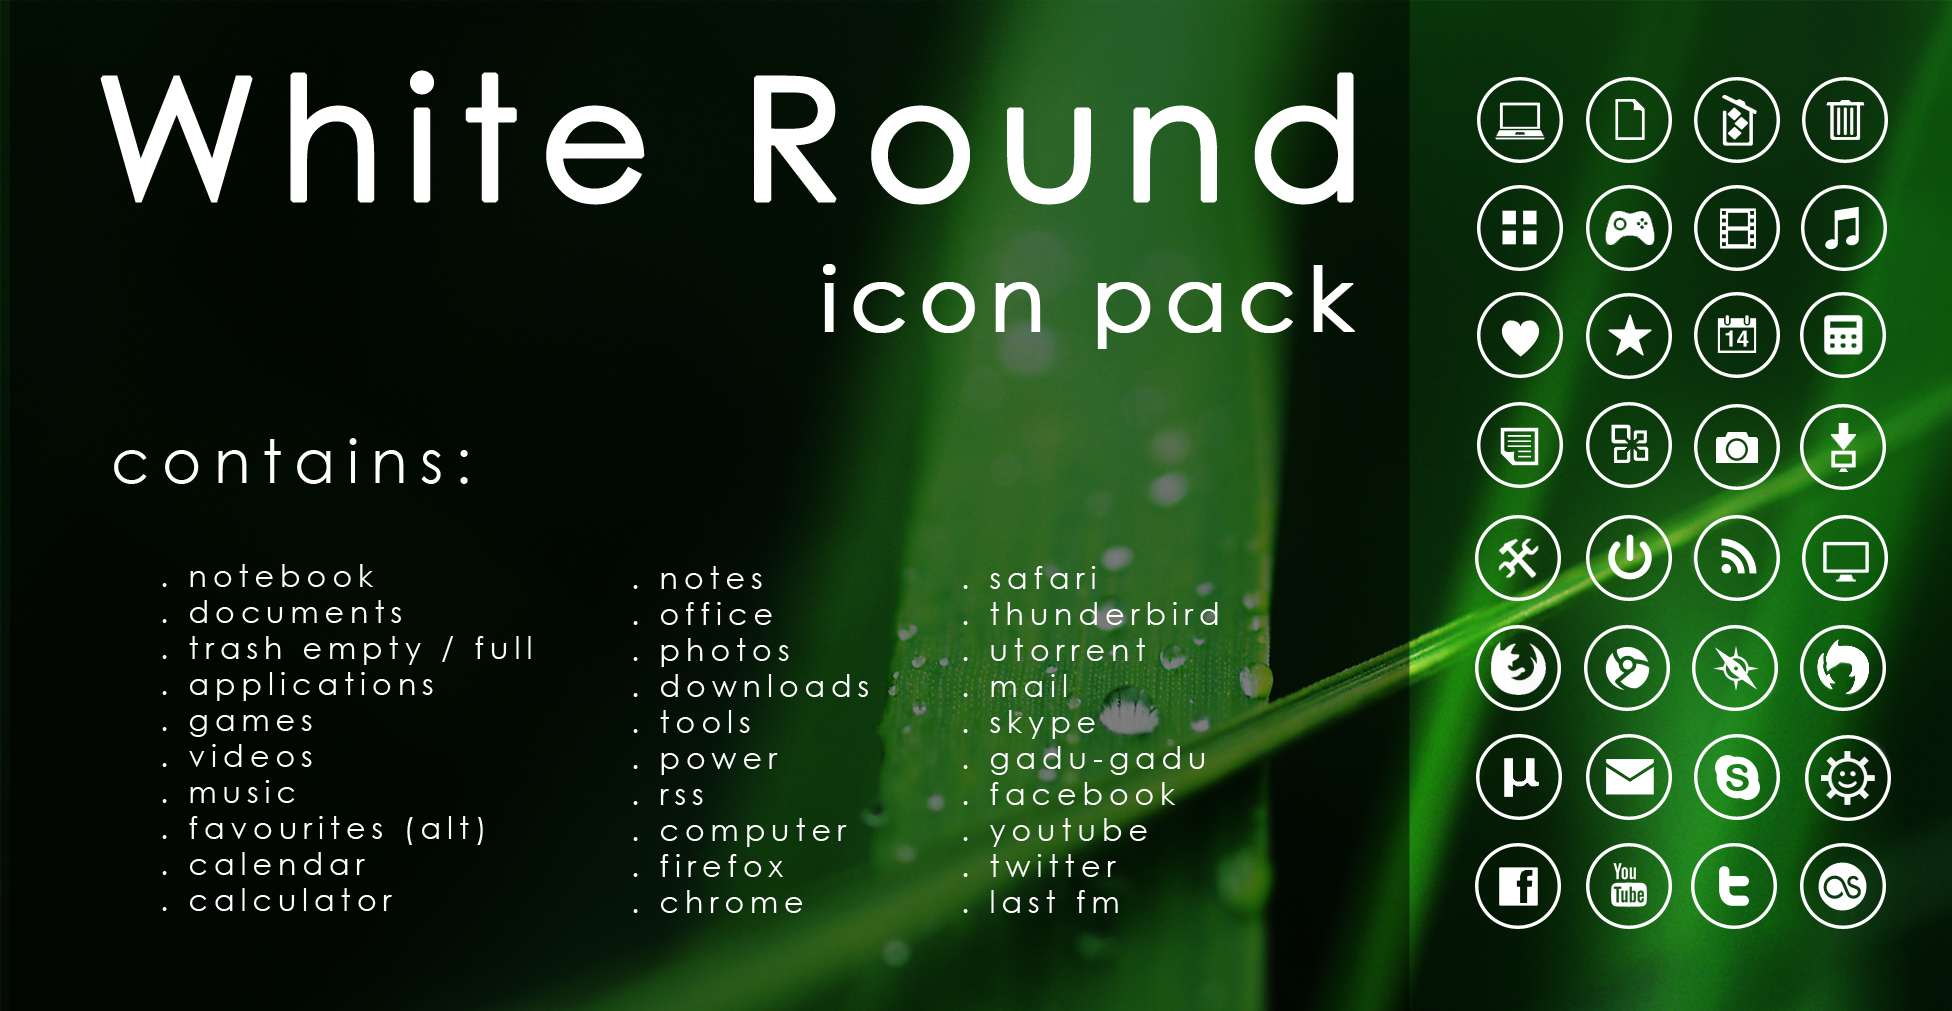 White Round Icon Pack By Mike1302 On Deviantart